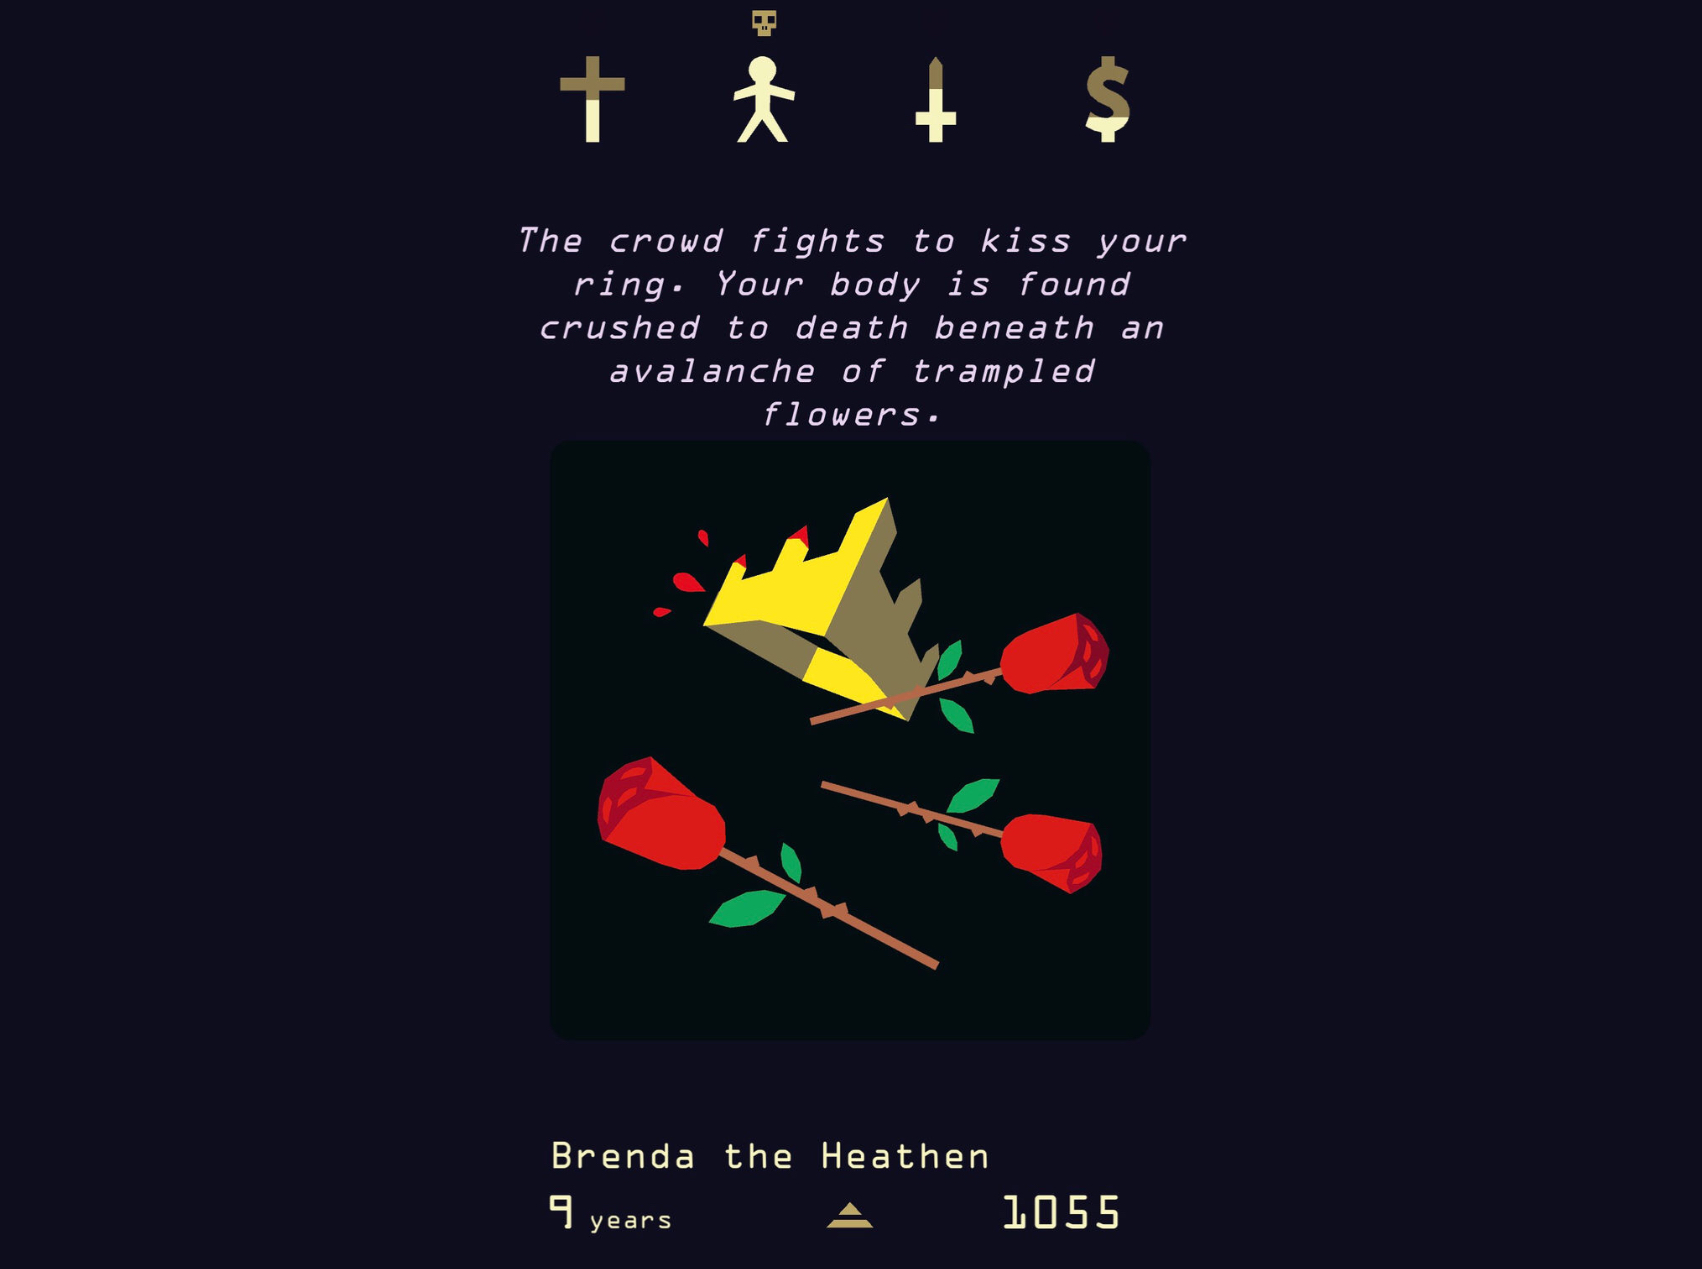 free download reigns her majesty items